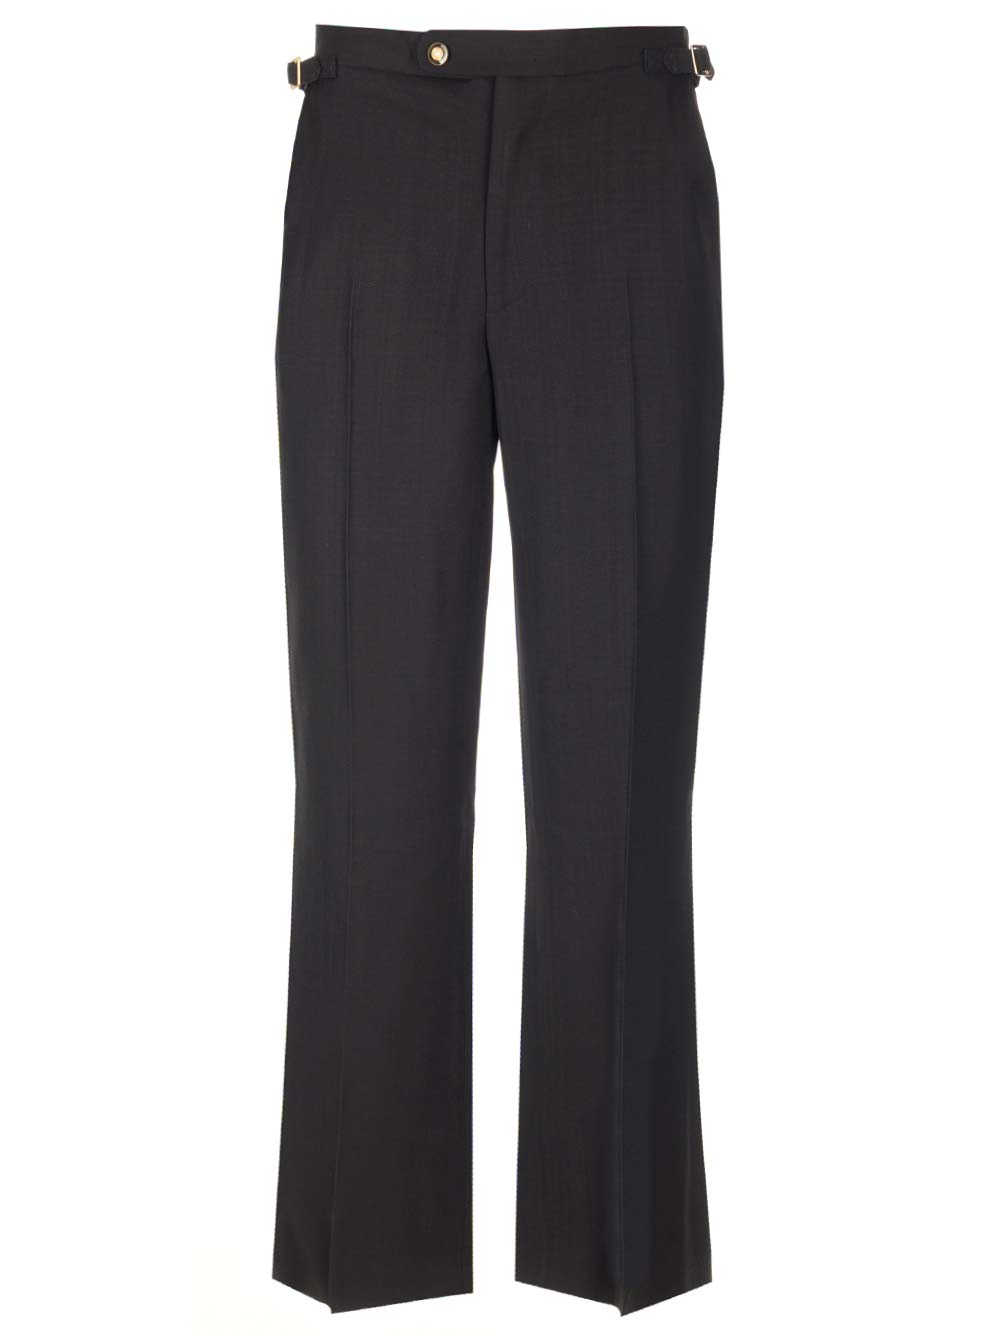 Casablanca Black Trousers With Side Adjusters